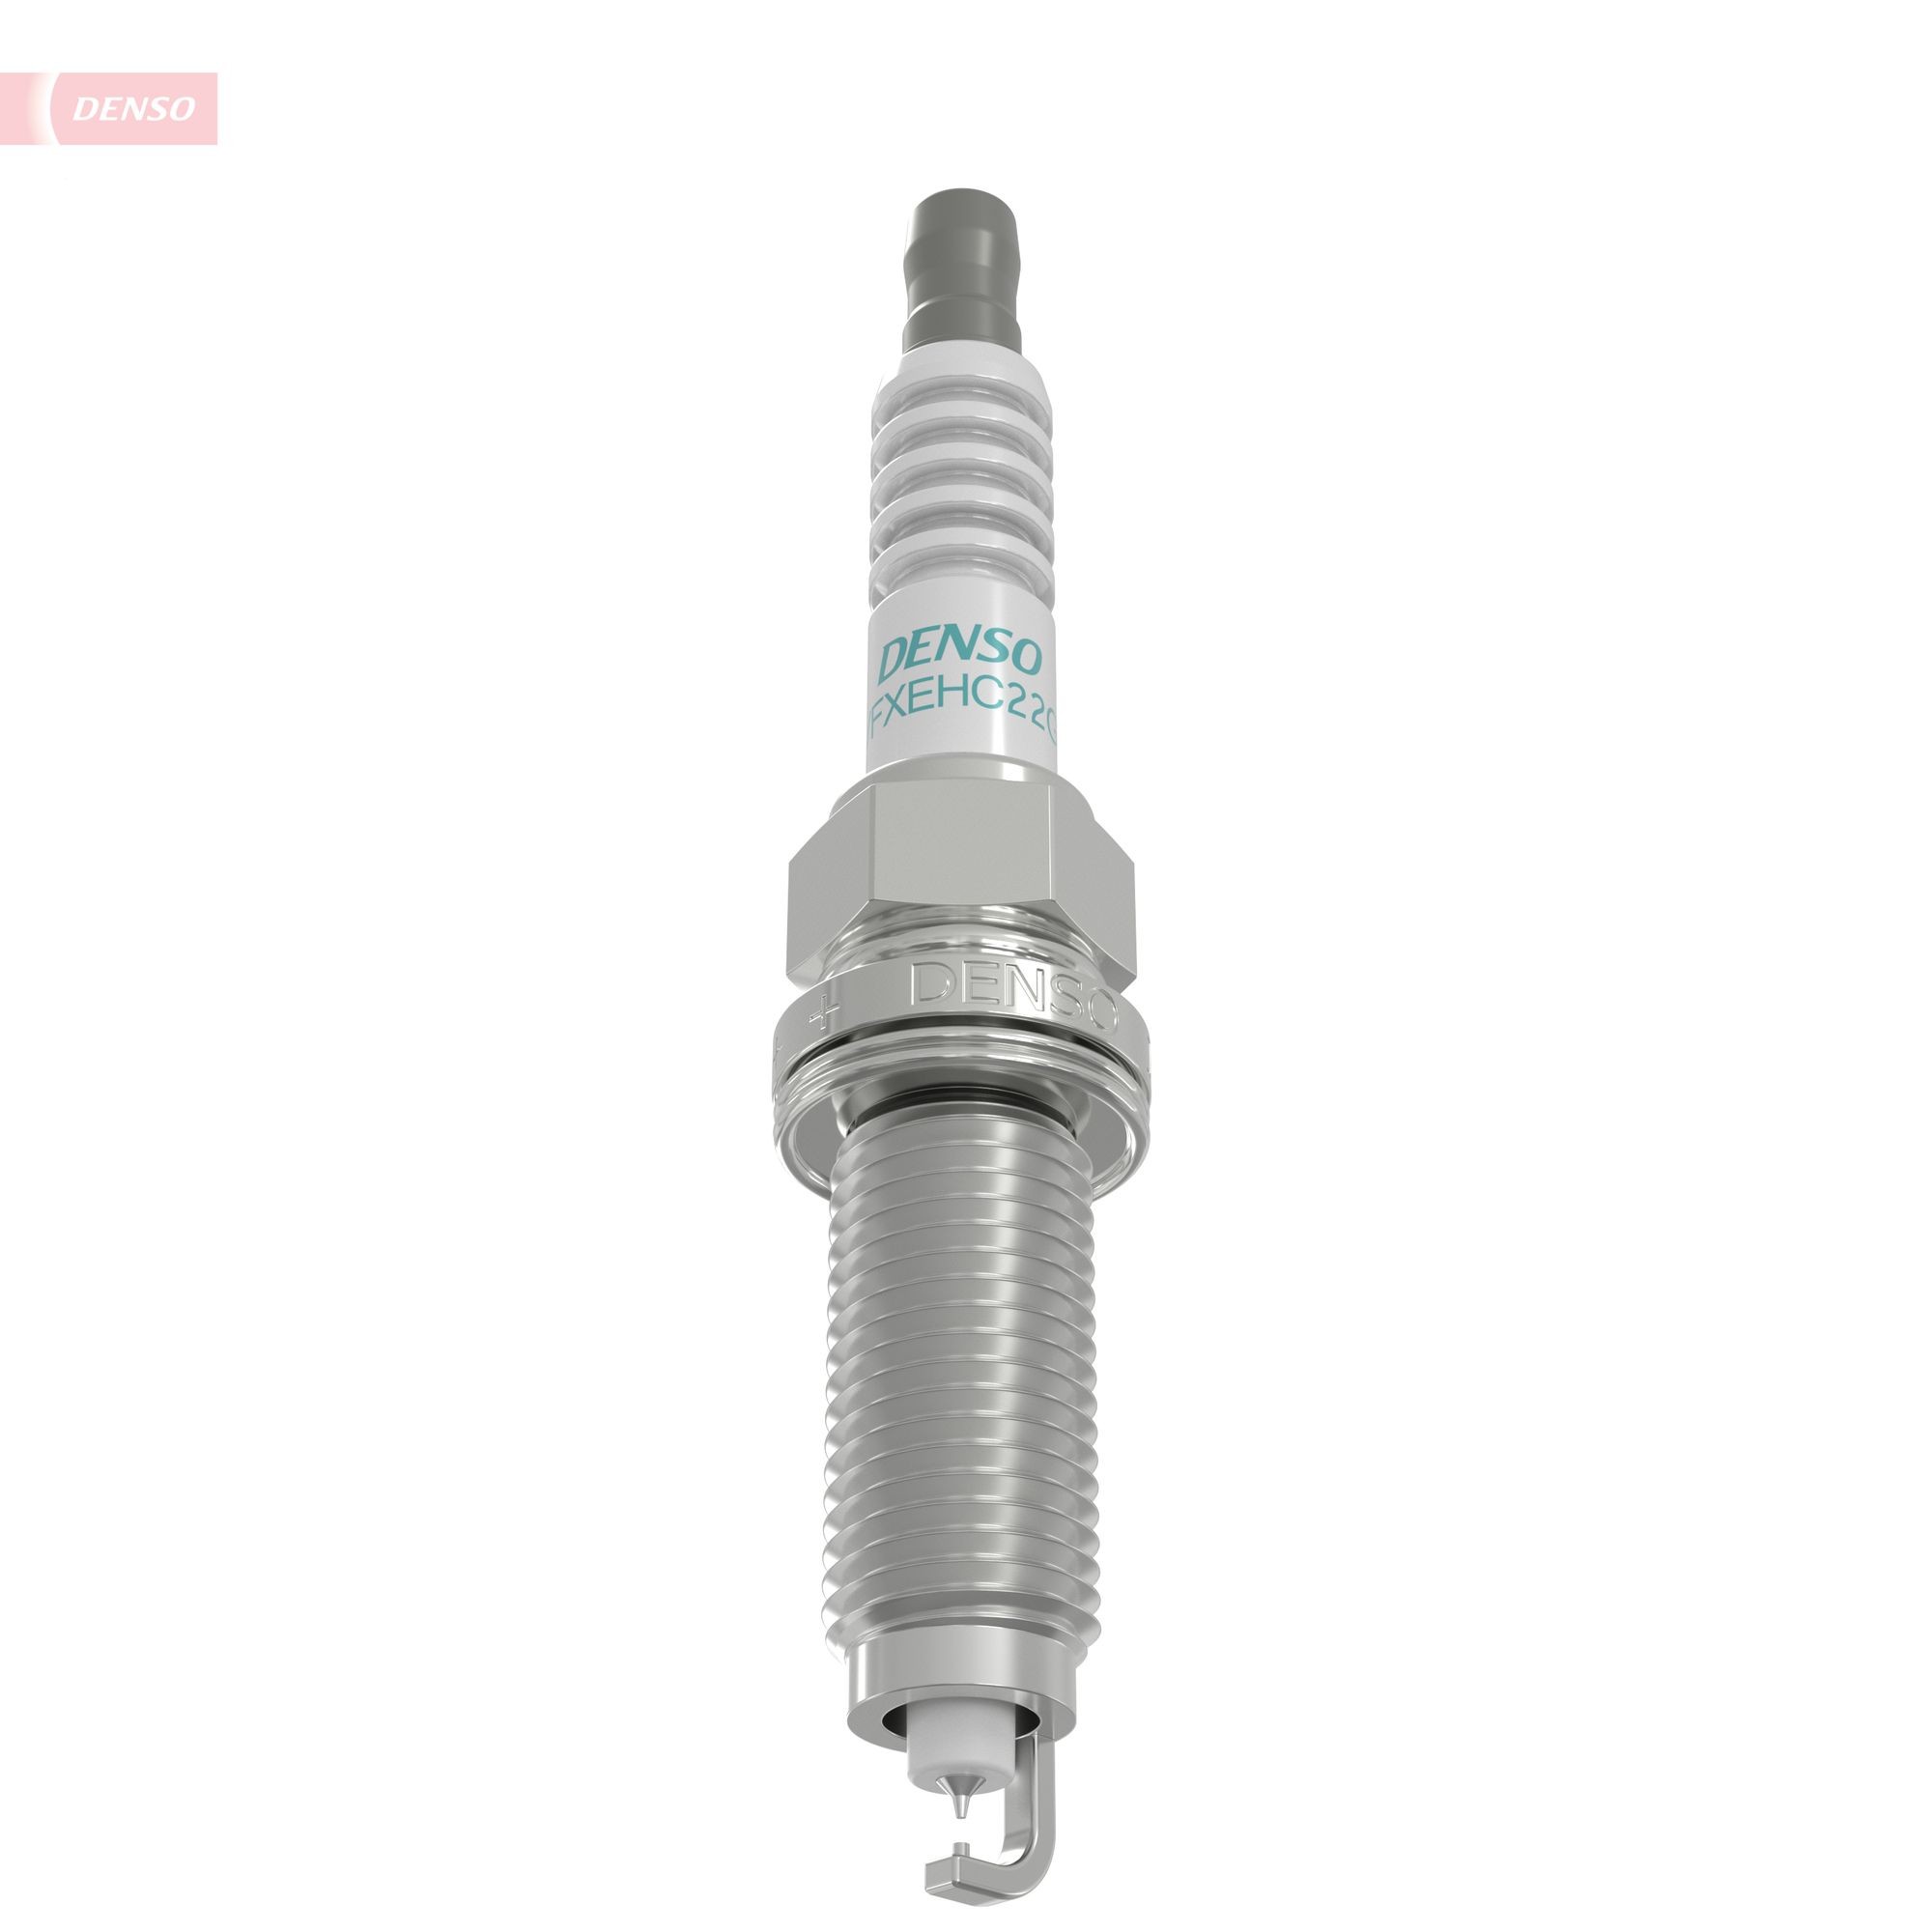 DENSO Spark plugs 5659 buy online